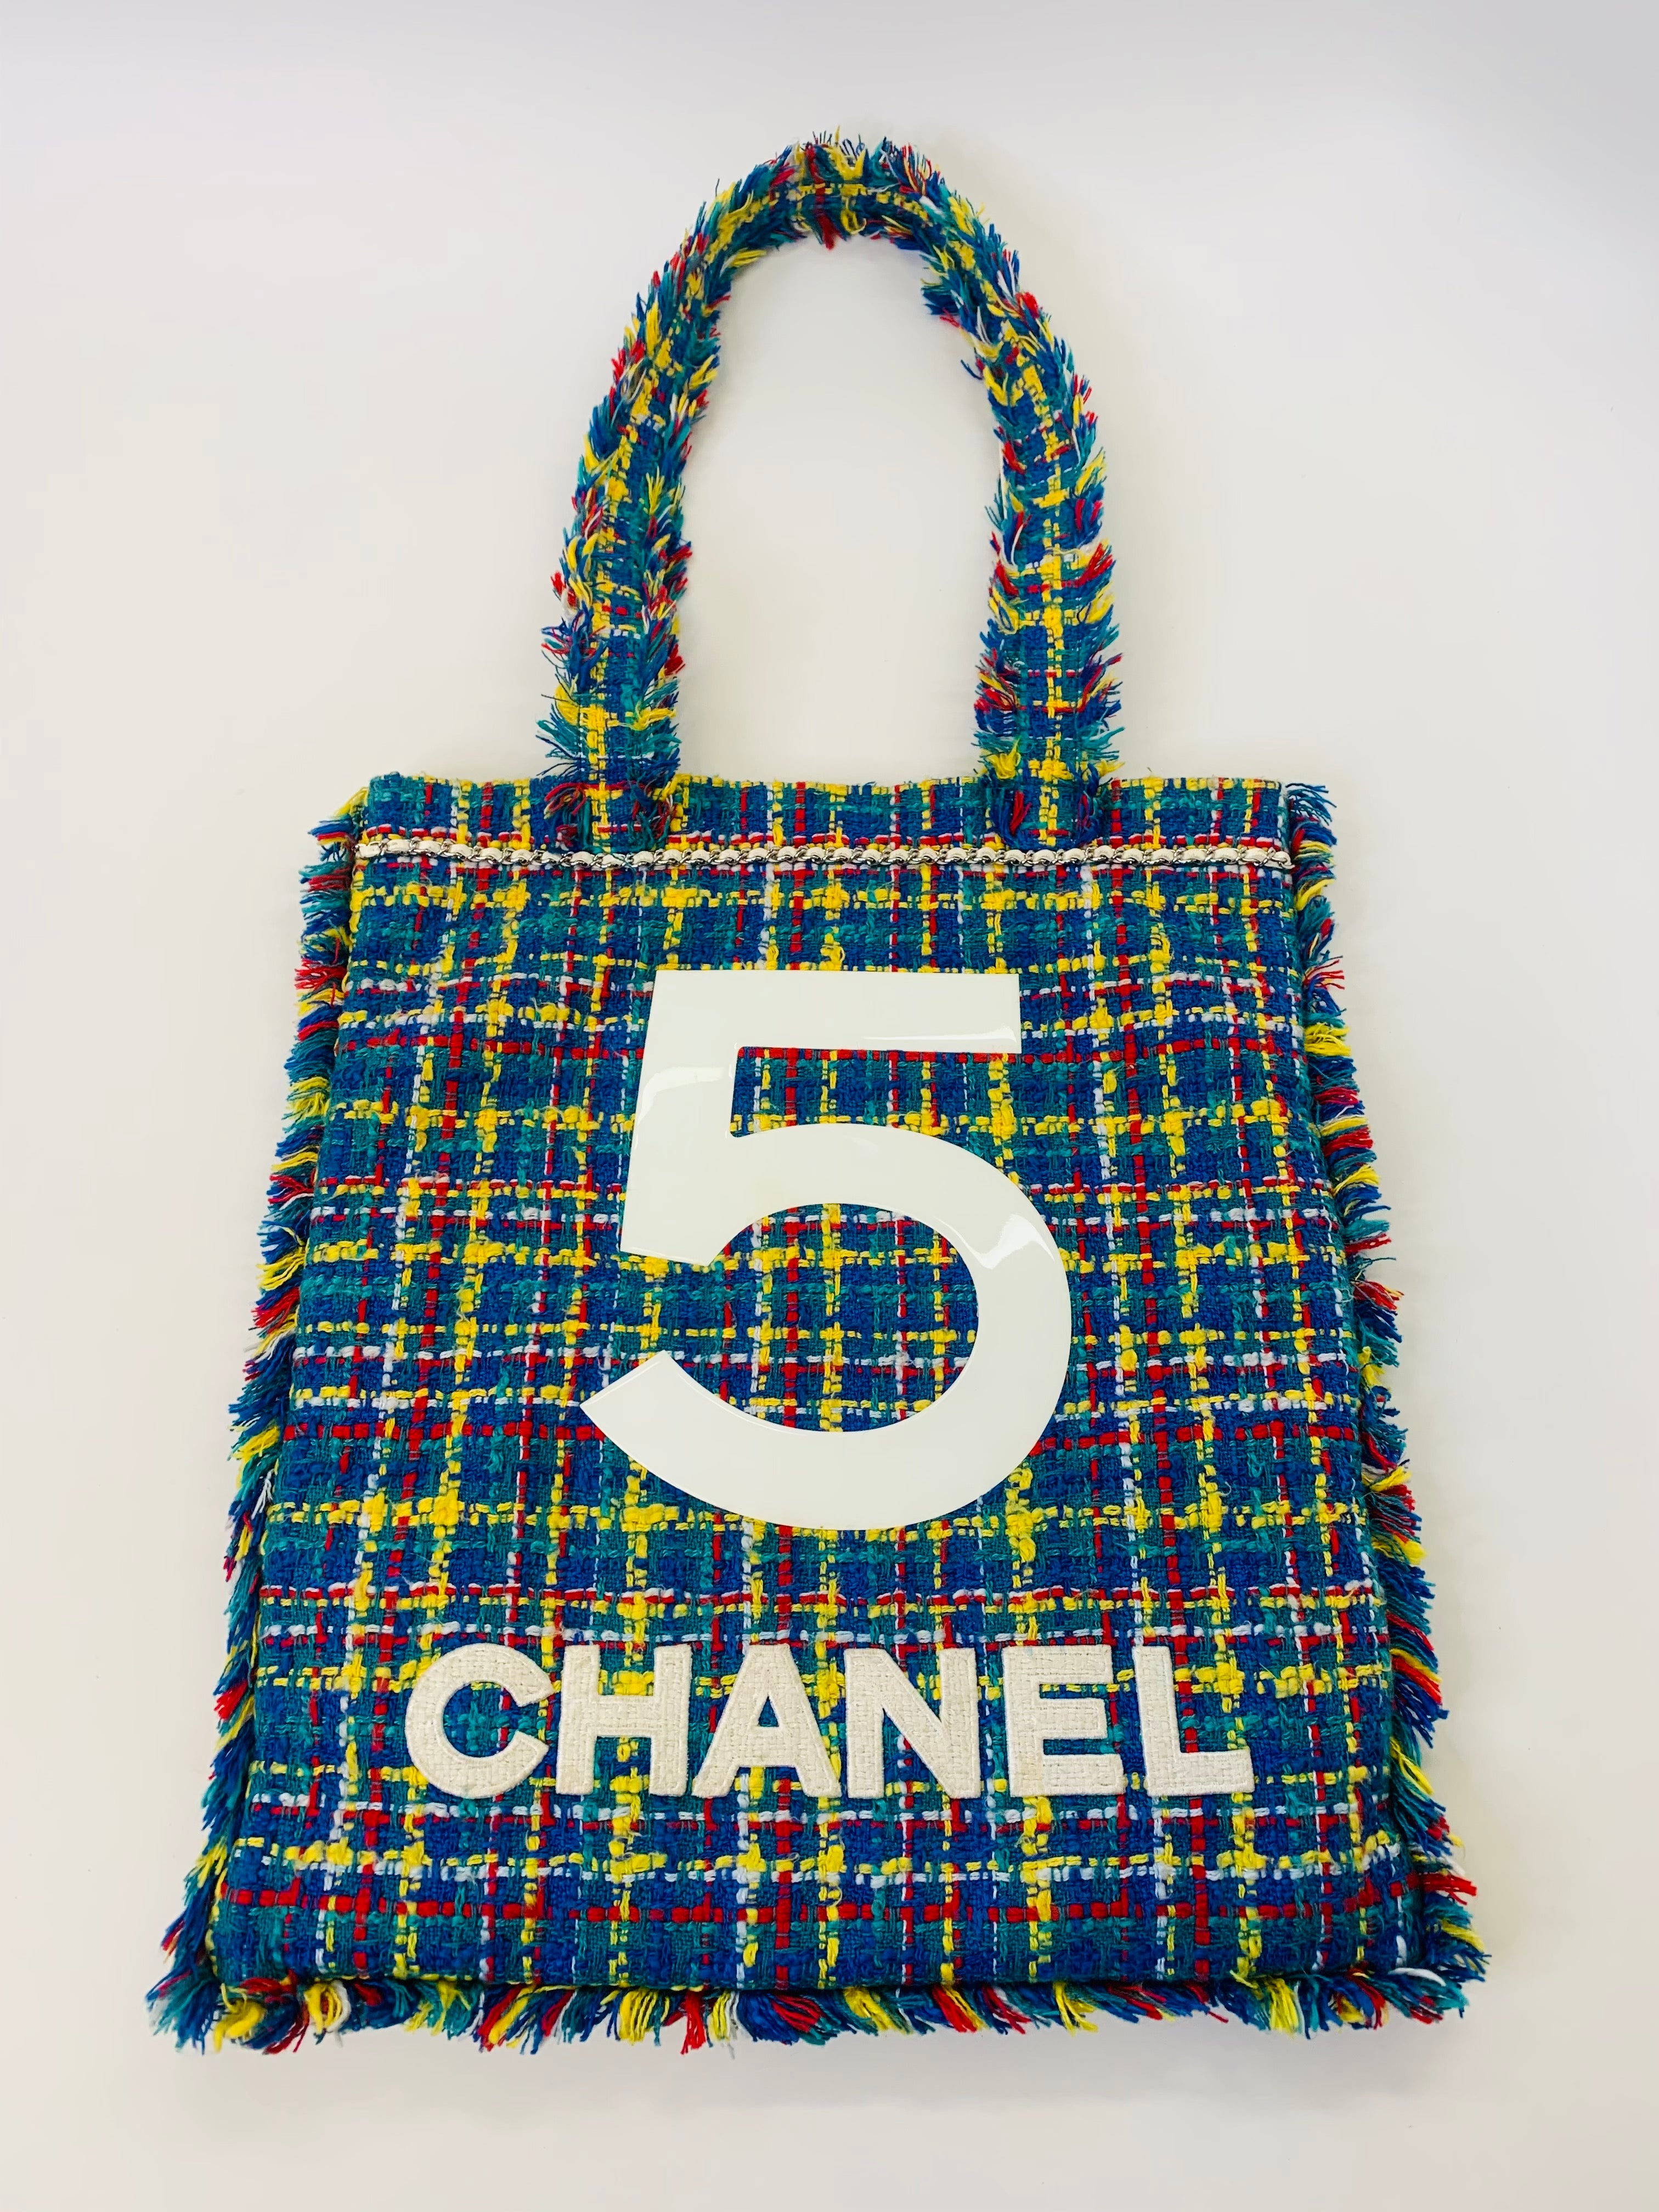 CHANEL Tote Bag 5x5 with Whistle - Shop it now - Certified Authentic